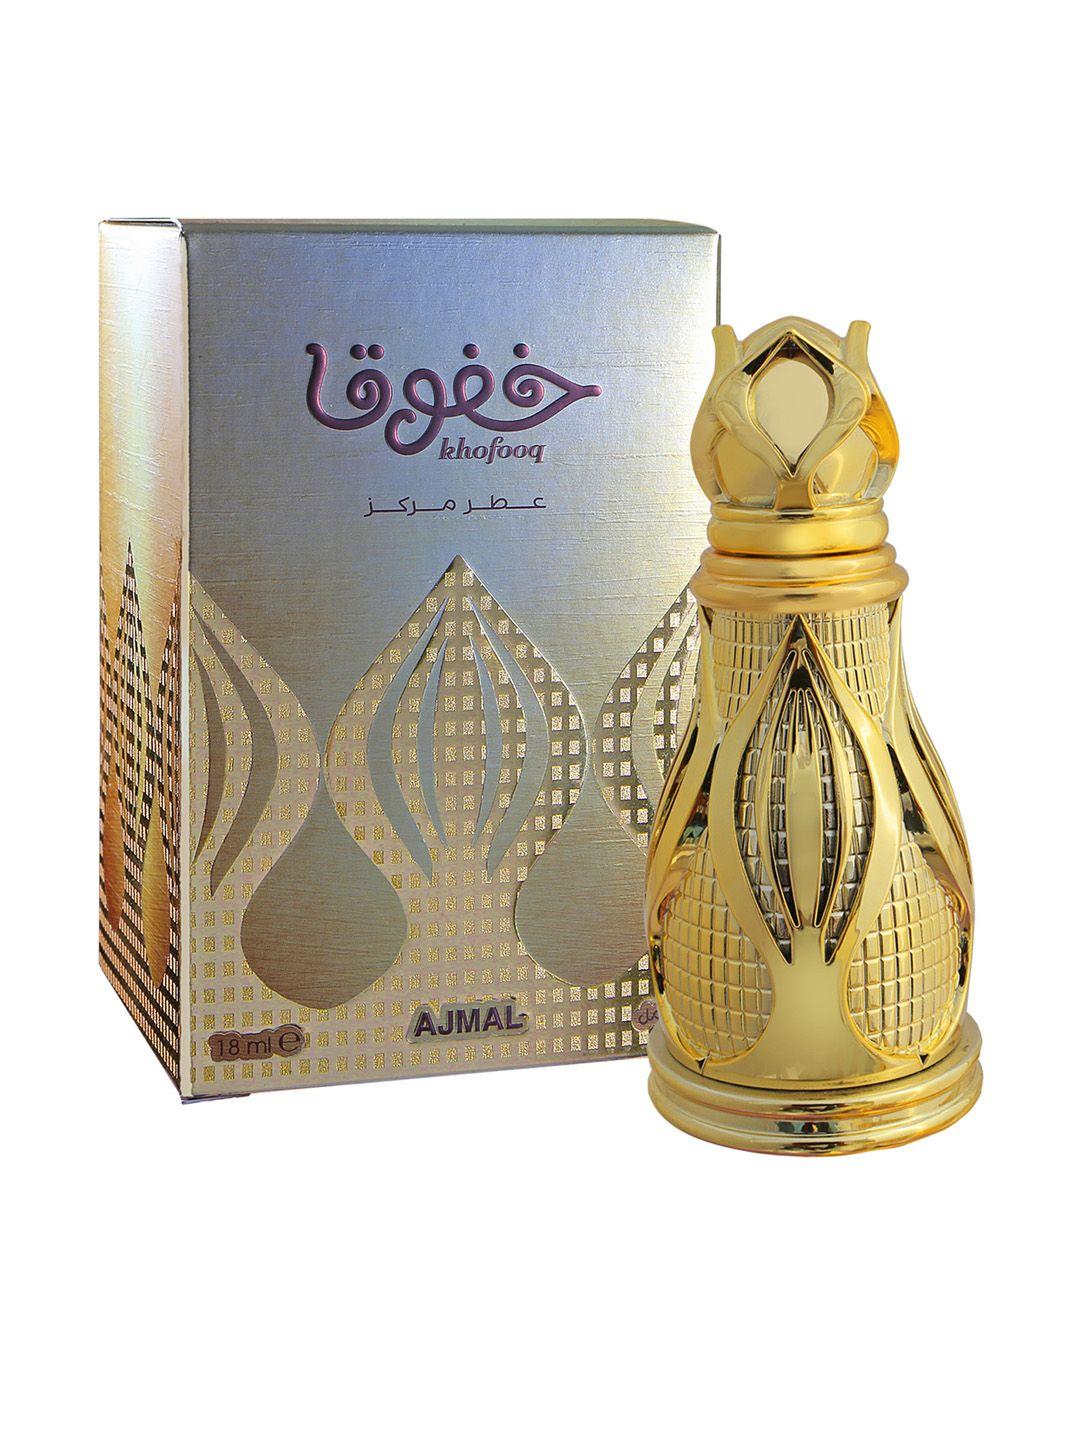 ajmal unisex khofooq concentrated floral perfume 18ml